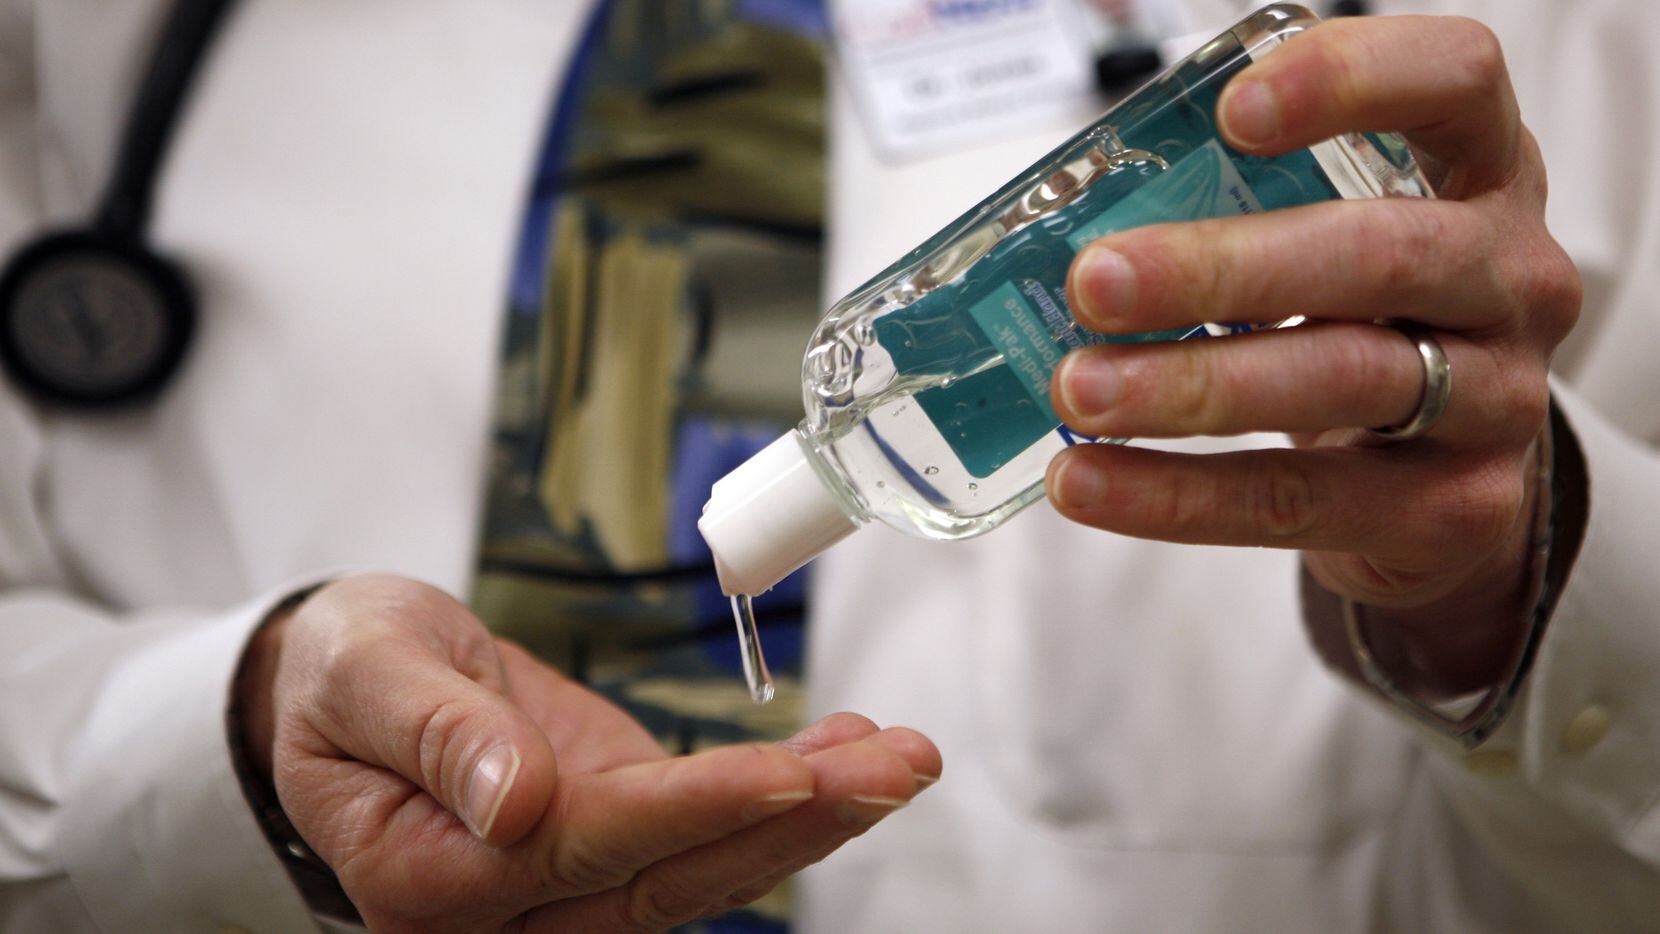 Health experts urge people to make frequent use of hand sanitizer and soap to help protect...